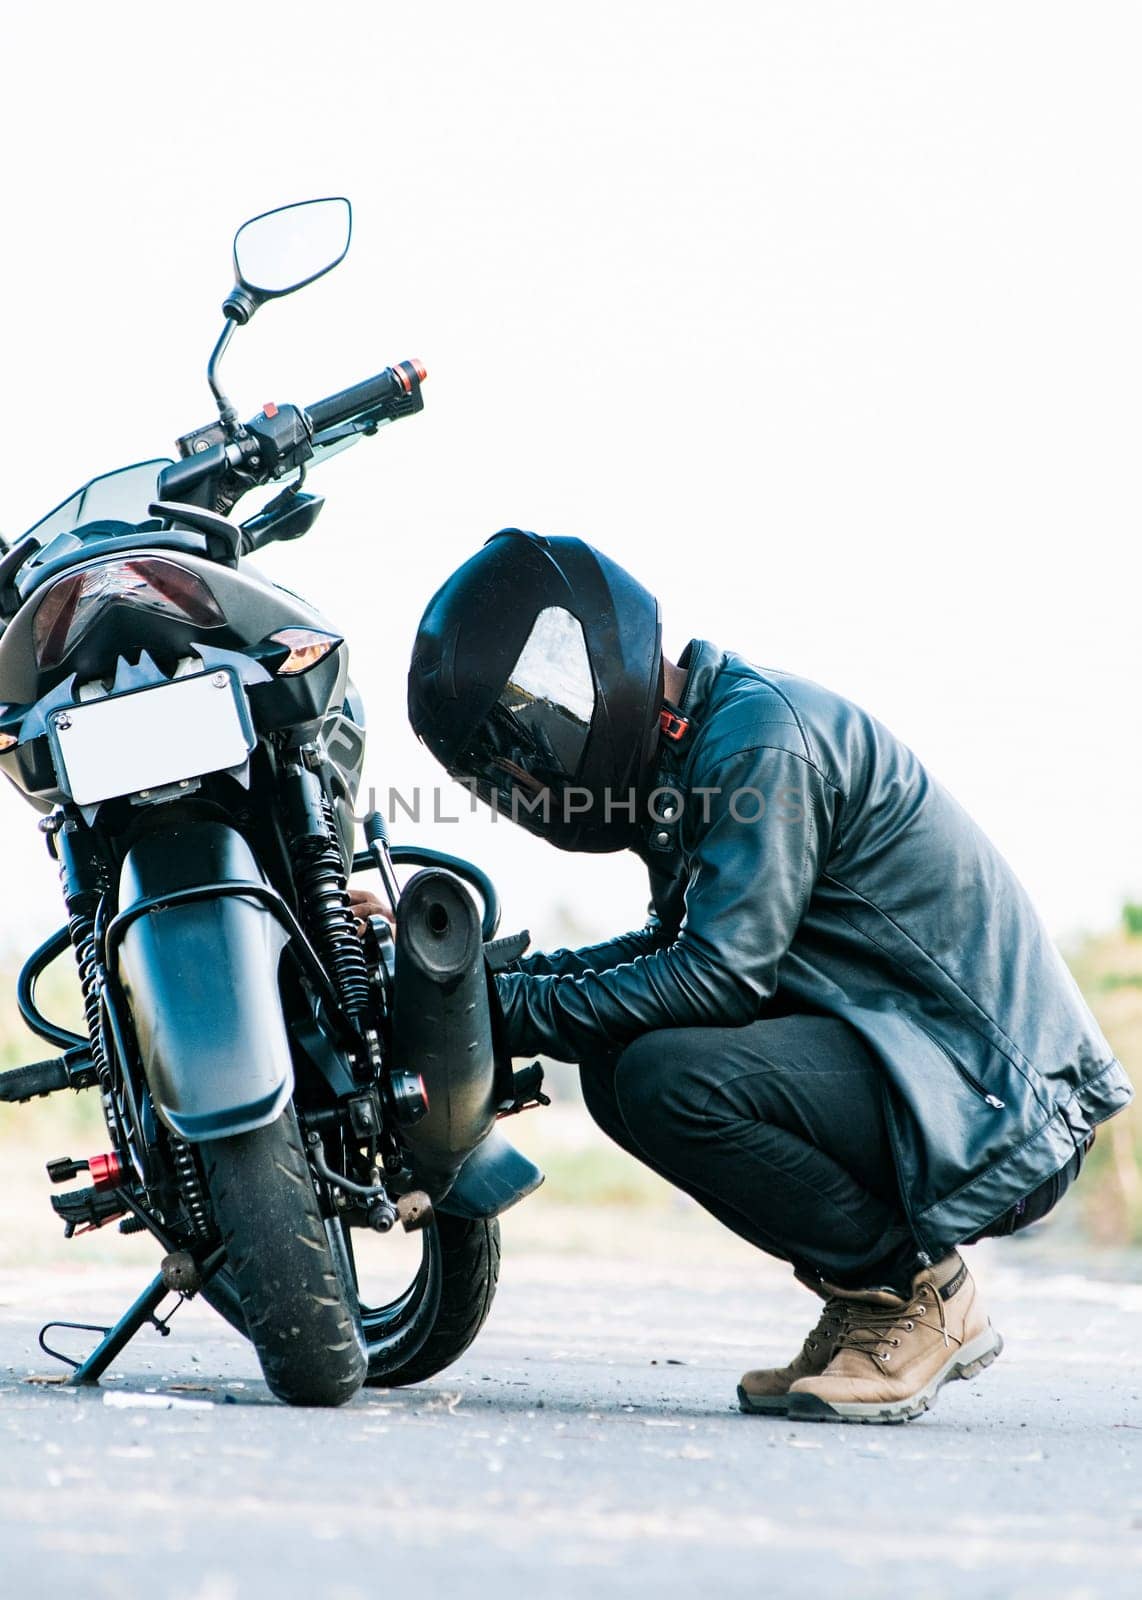 Man checking his motorcycle on the road. Motocyclist fixing the motorcycle on the road, Biker repairing motorcycle on the road by isaiphoto